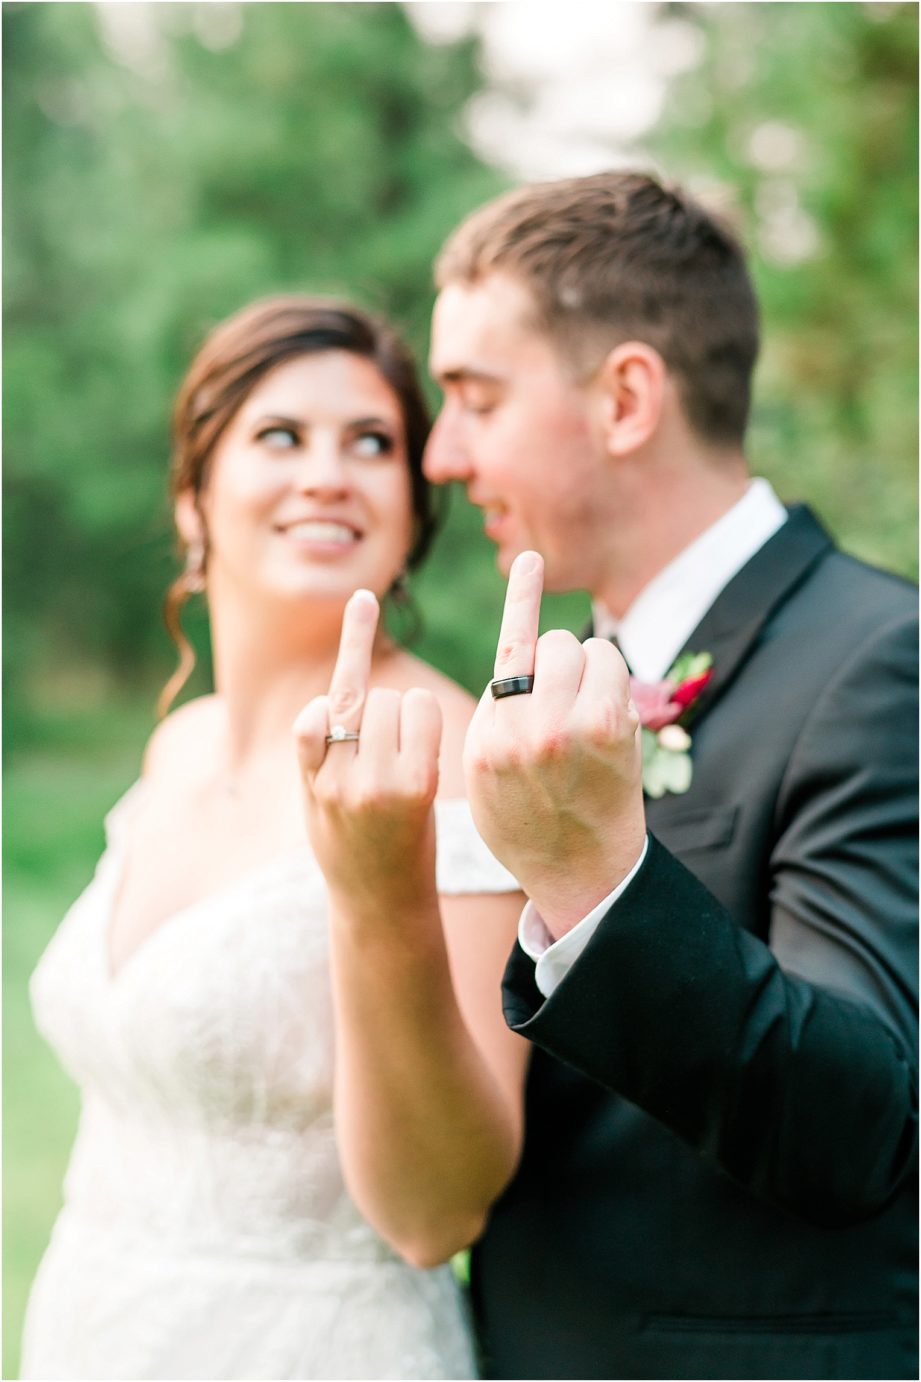 Intimate Pine River Ranch Wedding Leavenworth Photographer Jon and Kristen showing their rings